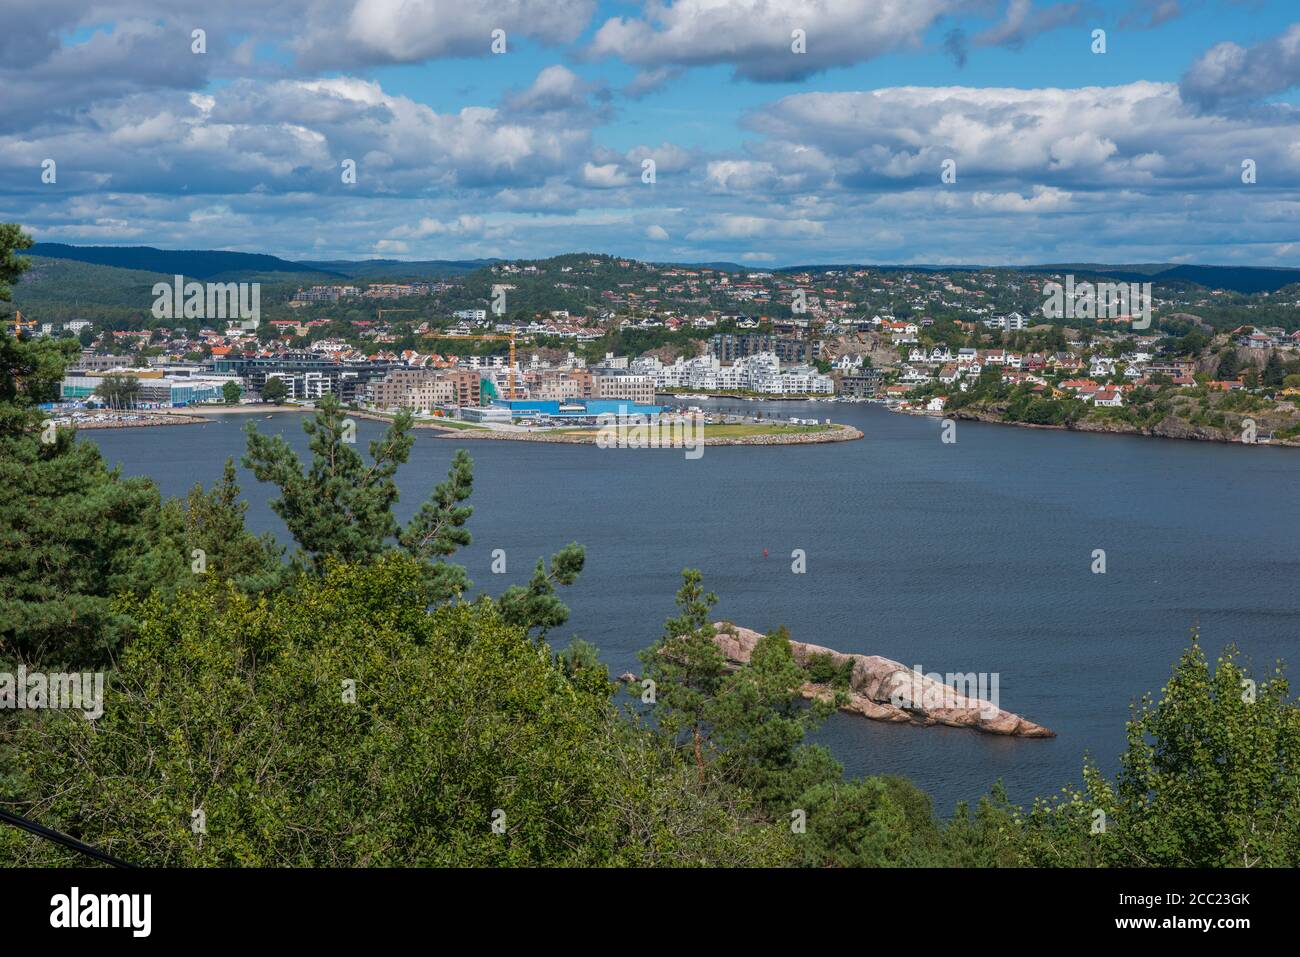 Norway, Kristiansand, View of town and bay Stock Photo